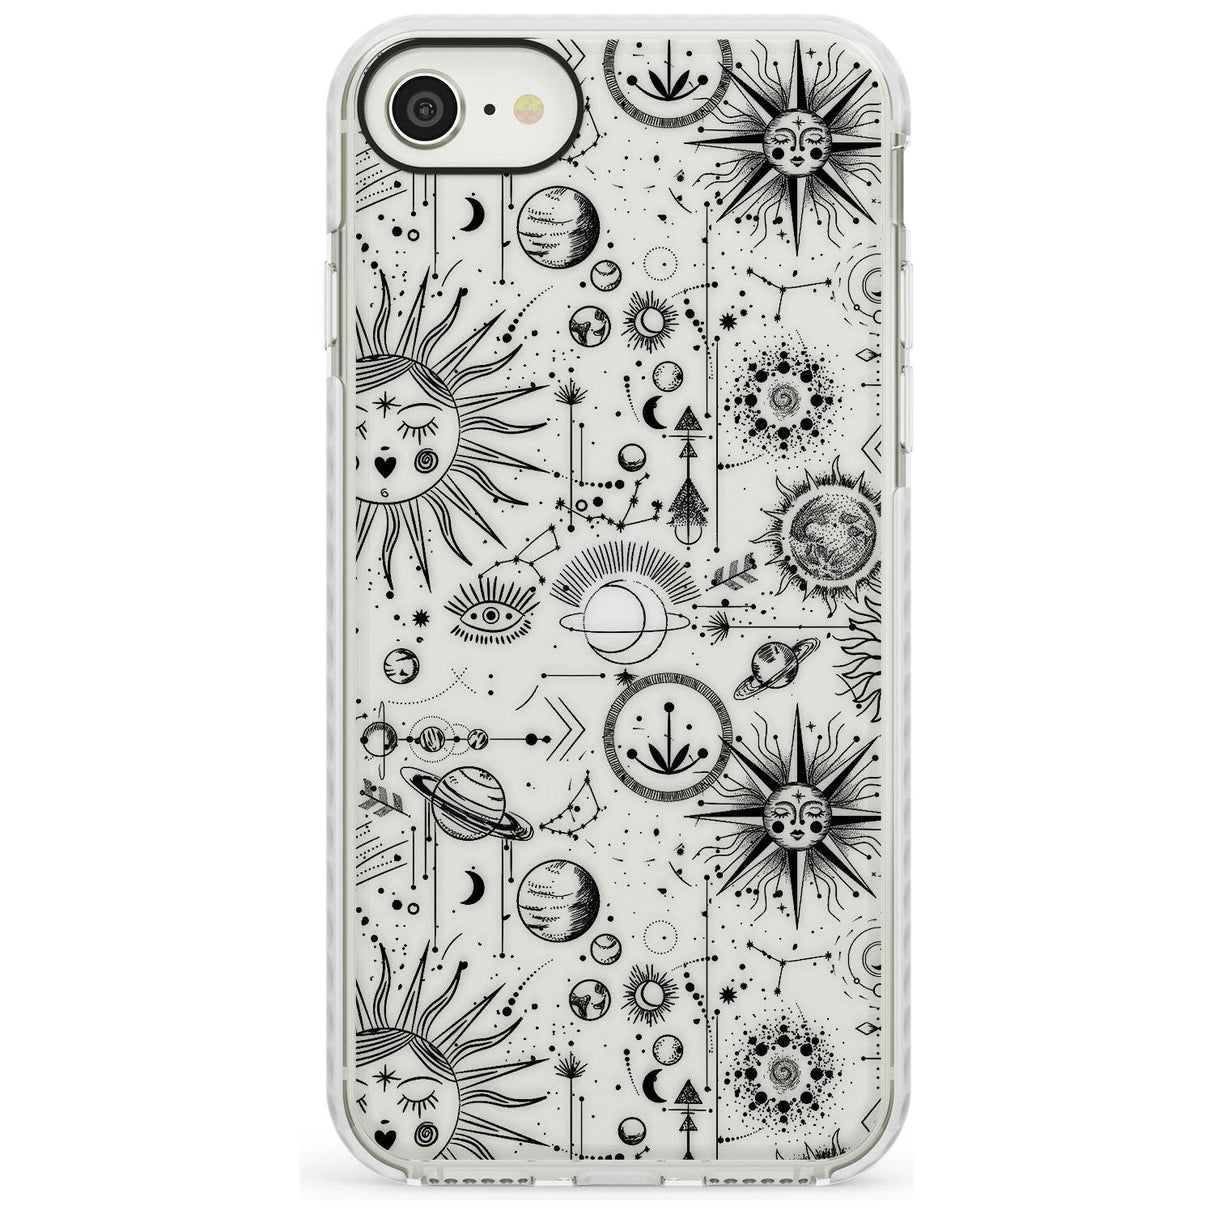 Suns & Planets Vintage Astrological Impact Phone Case for iPhone SE 8 7 Plus